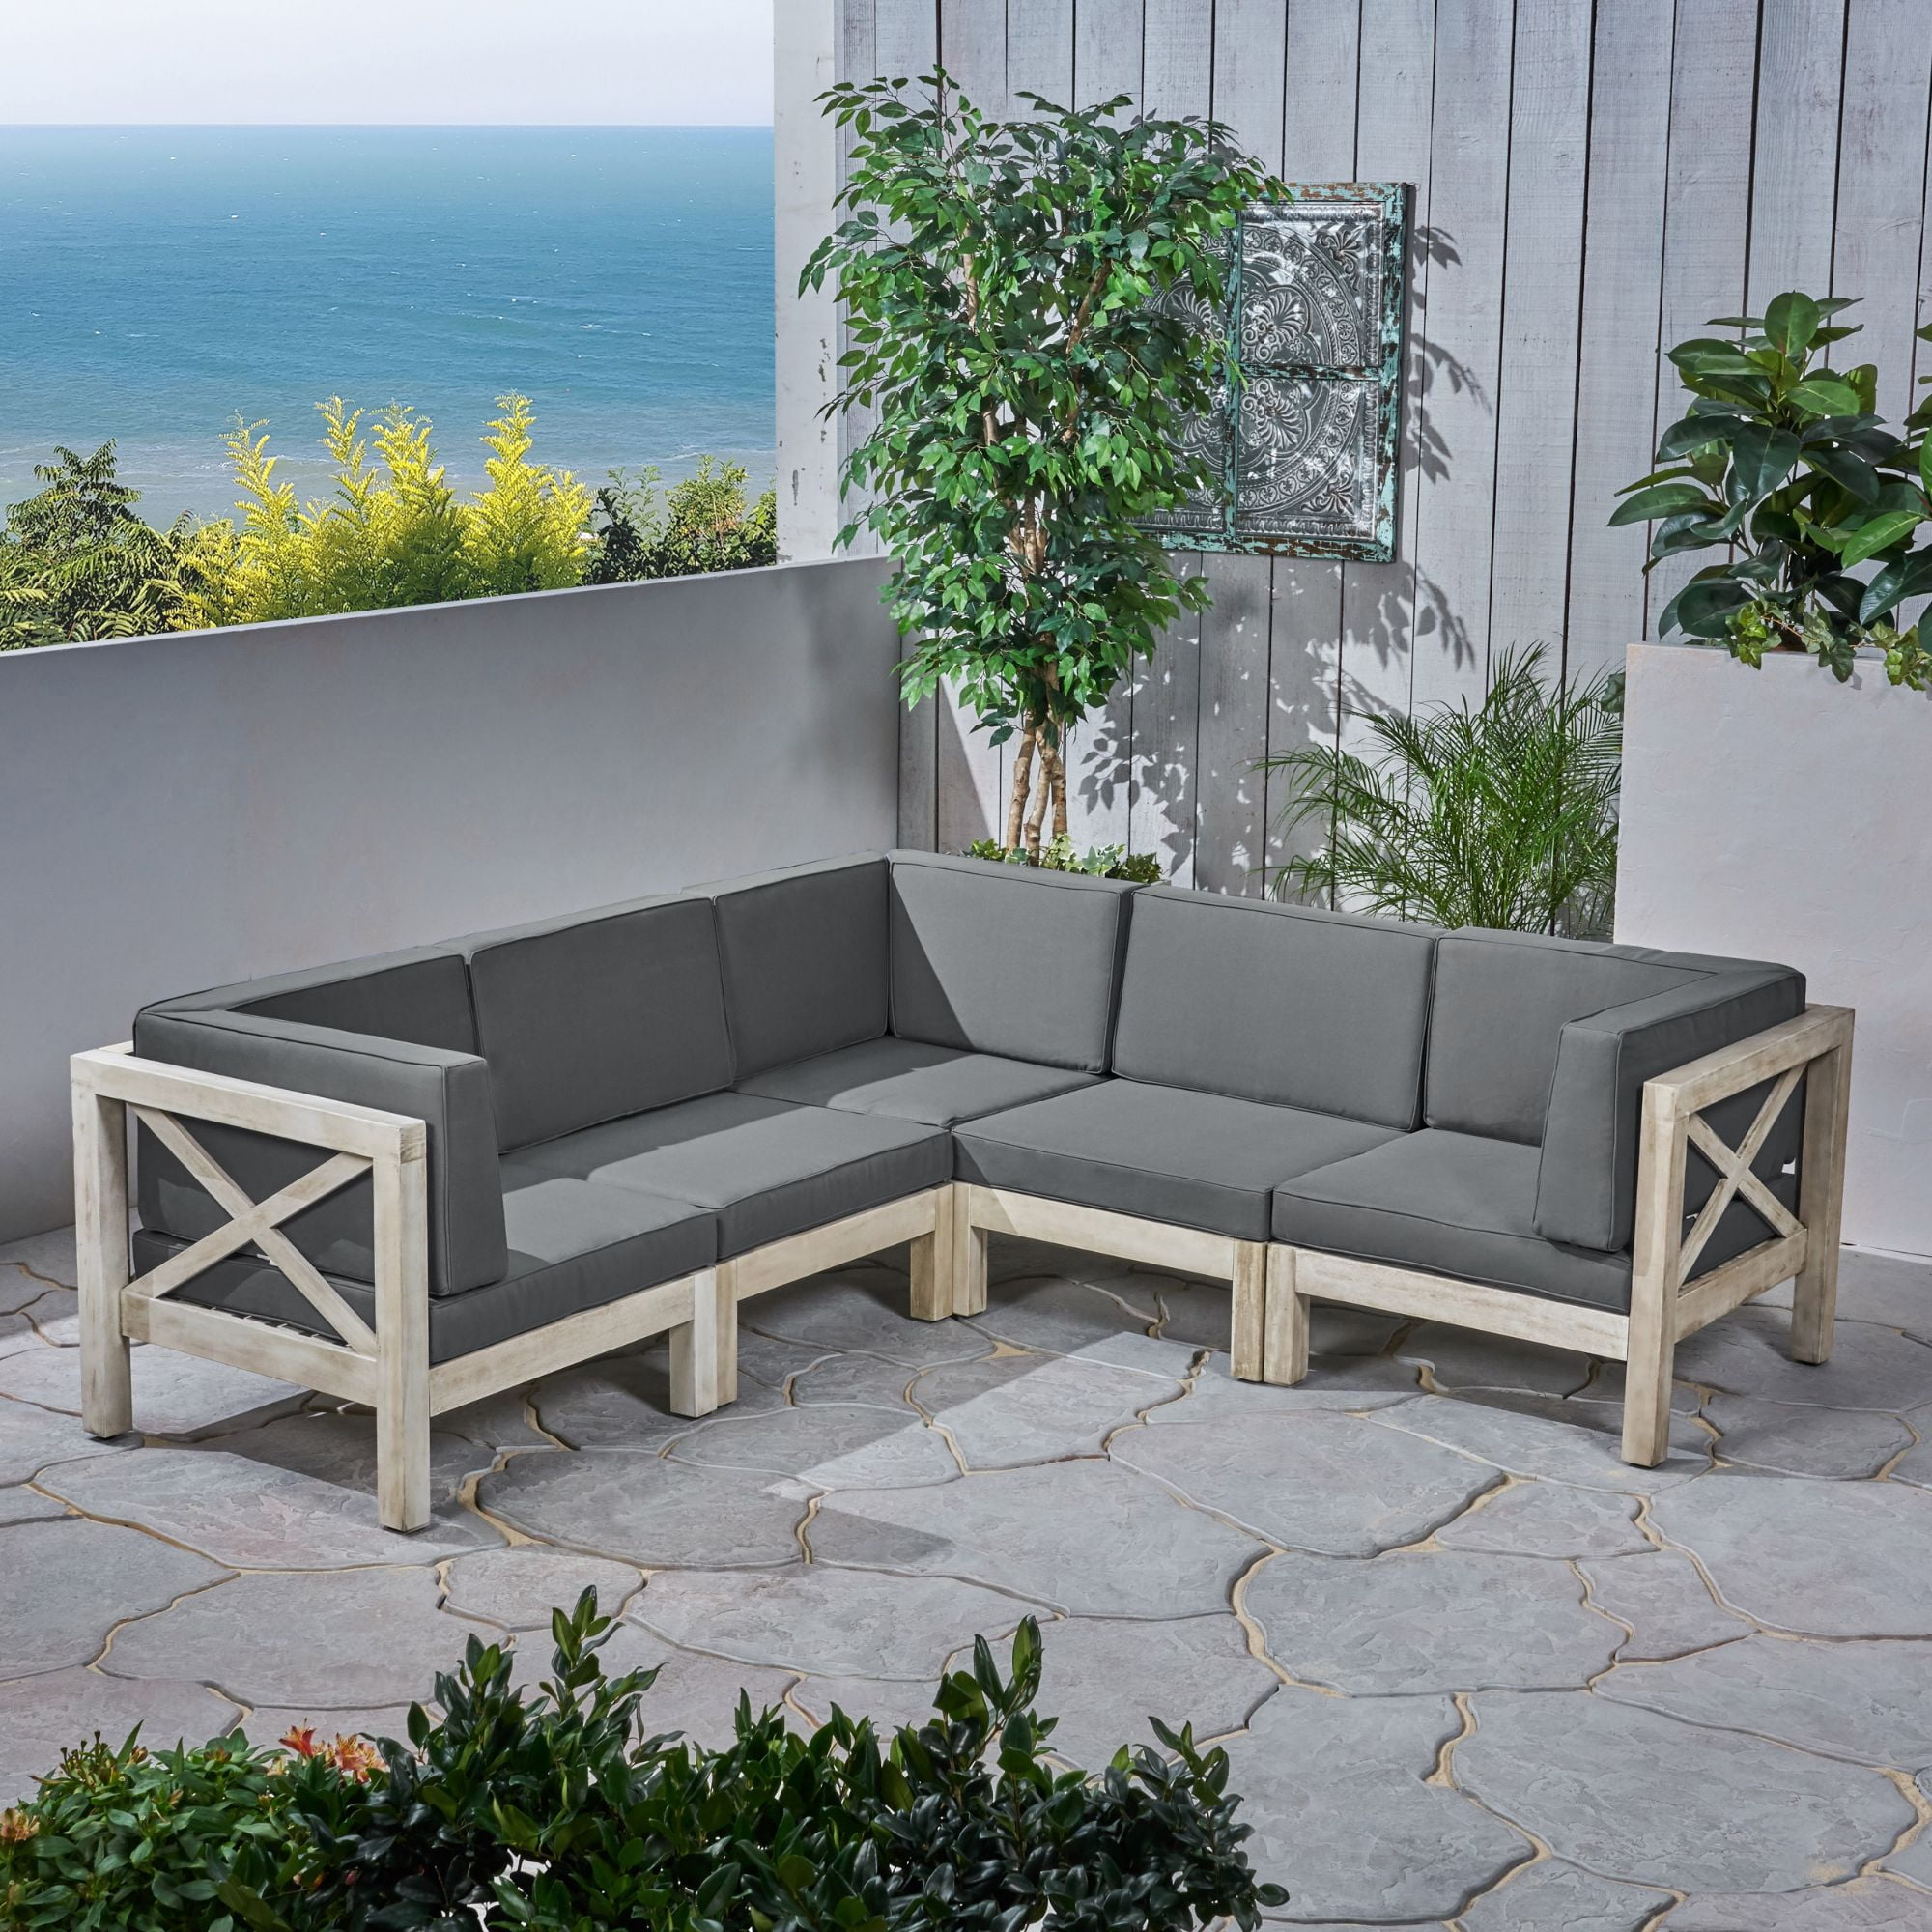 5 Piece Gray Contemporary Outdoor Furniture Patio 5 Seater Sectional